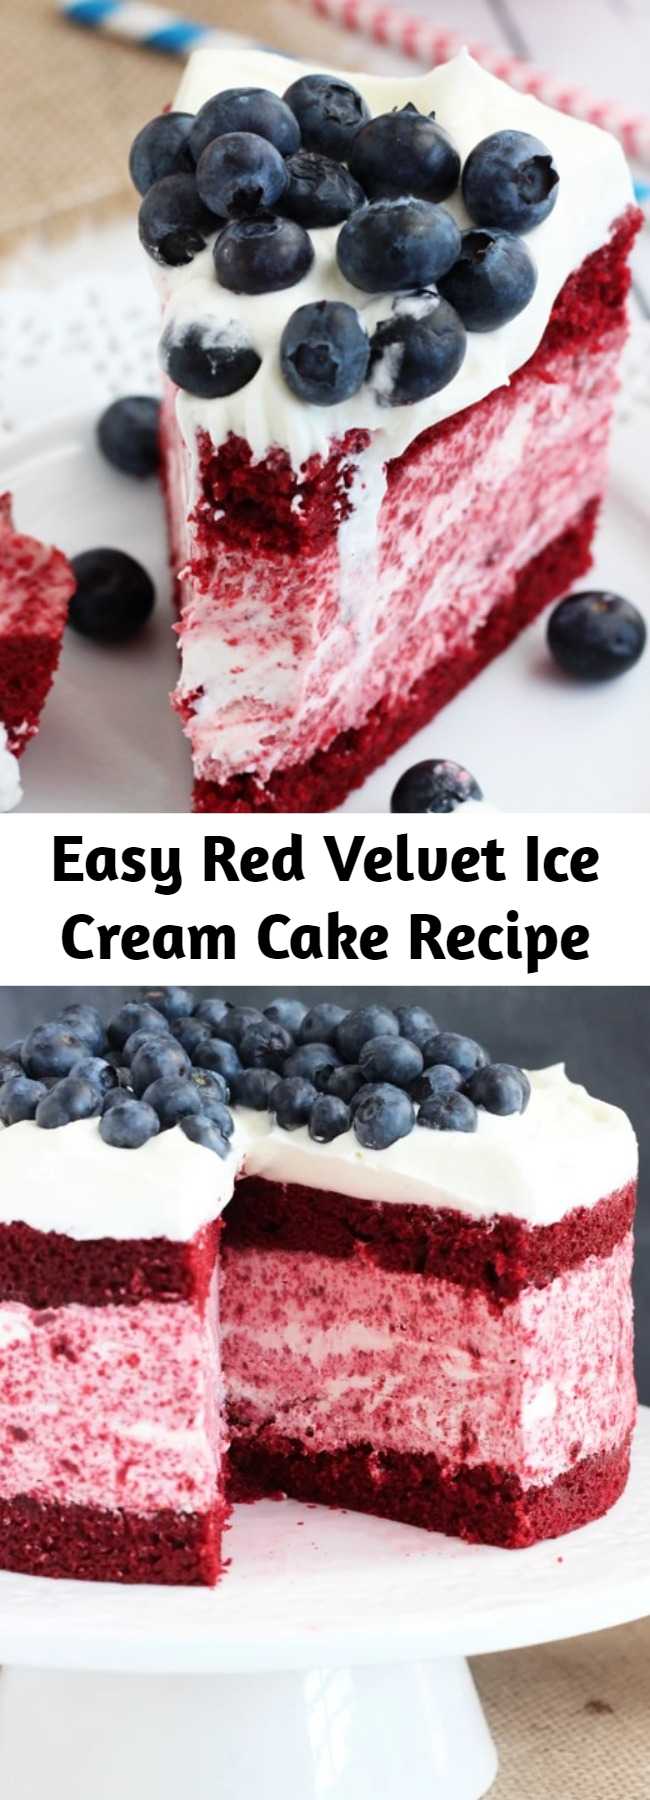 Easy Red Velvet Ice Cream Cake Recipe - This Red Velvet Ice Cream Cake might just be my new favorite cake, period. I couldn’t decide if I want to give it all away so that I couldn’t eat it all or just give in and eat it every last bite. The longer it stayed in the house, the more I ate.